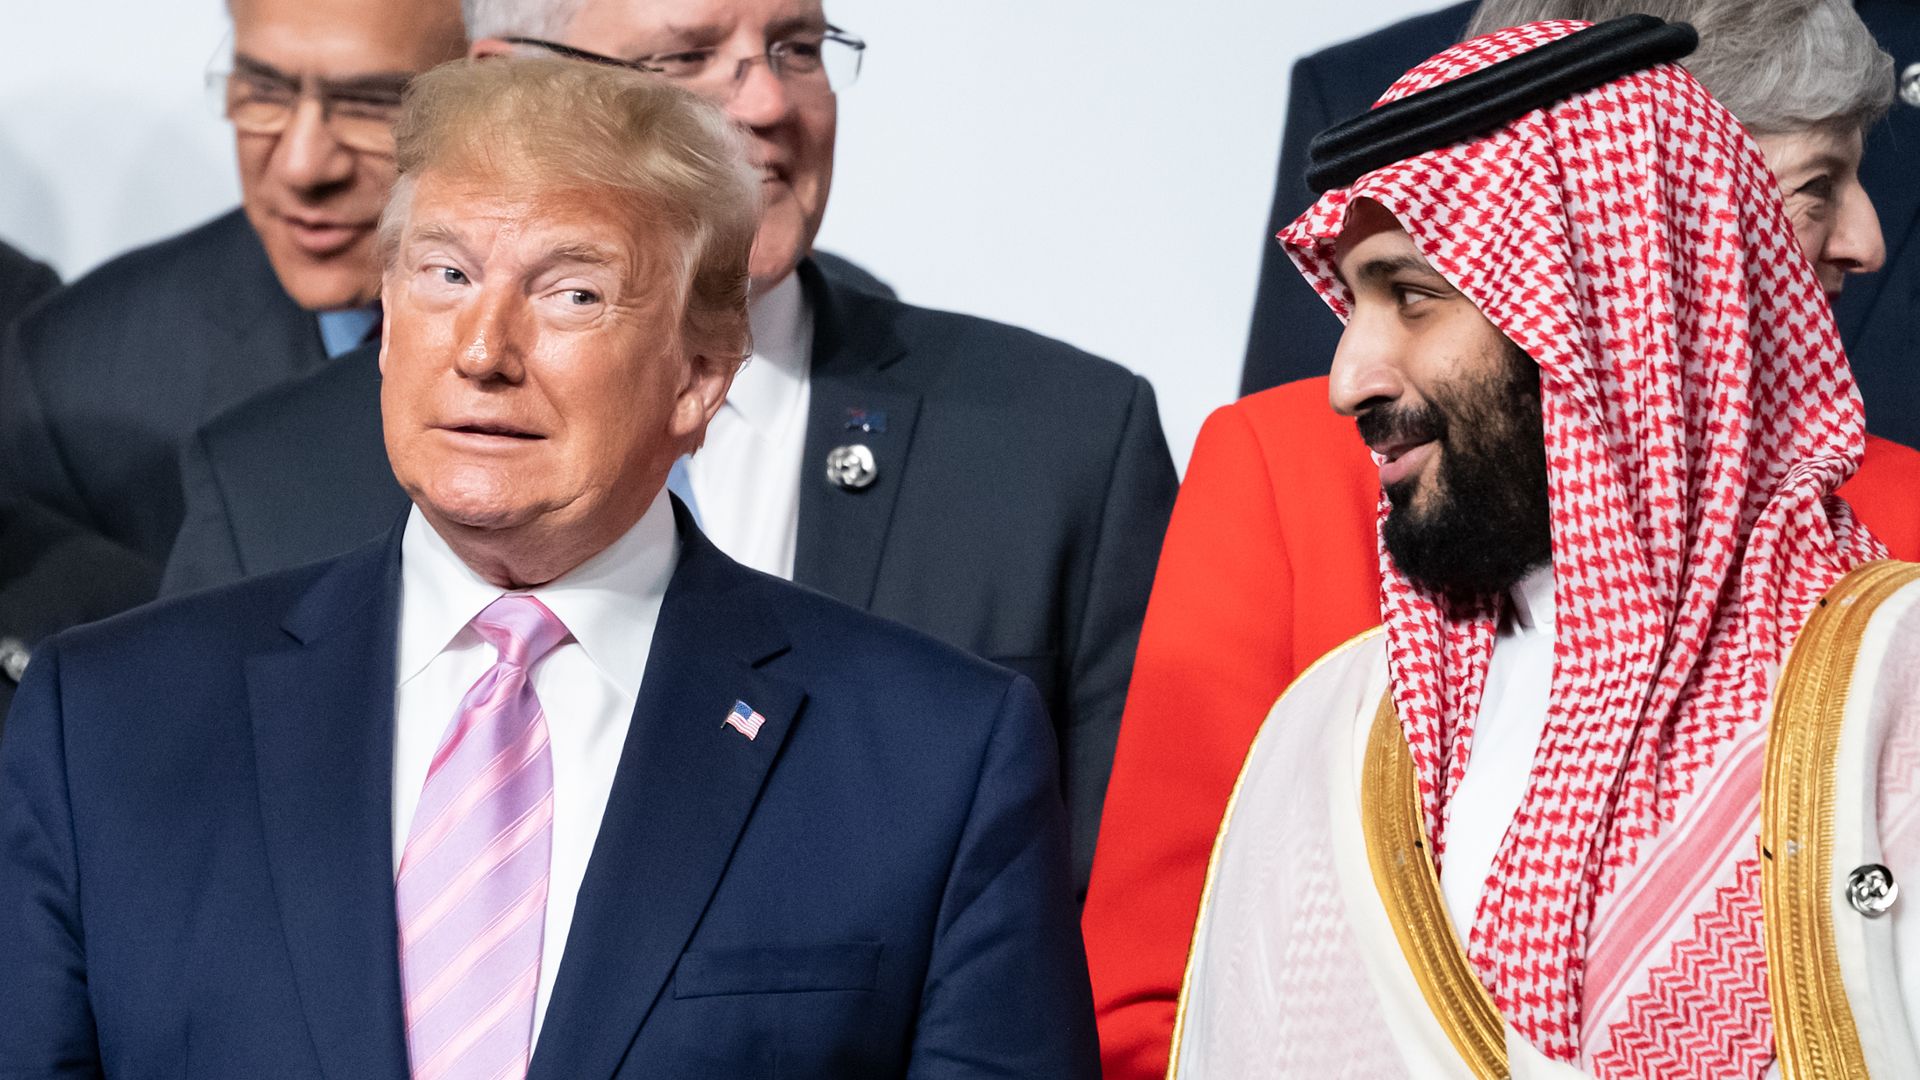 In this image, Trump and MBS speak in a friendly way to each other.